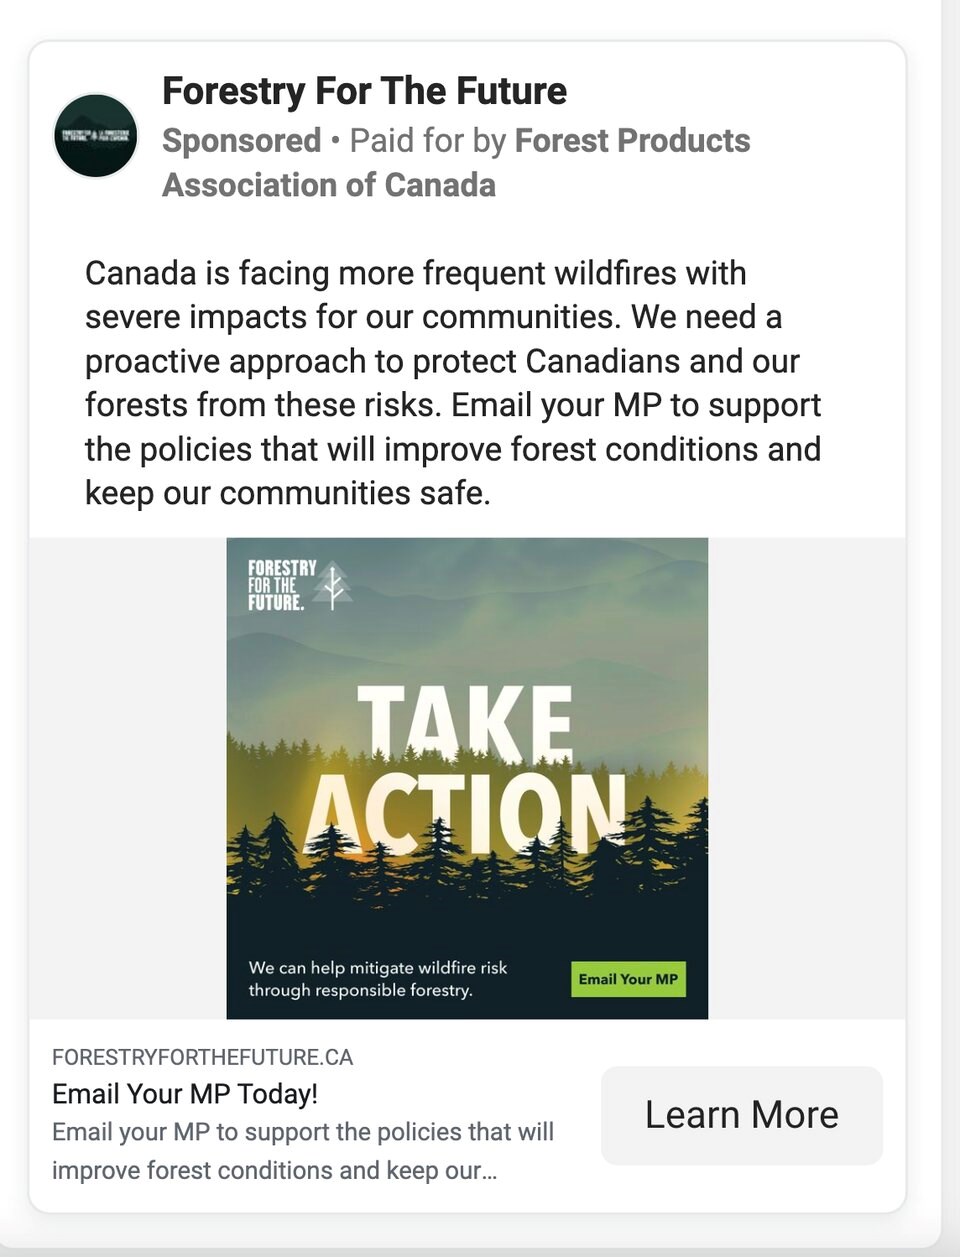 fpac-ad-on-wildfires